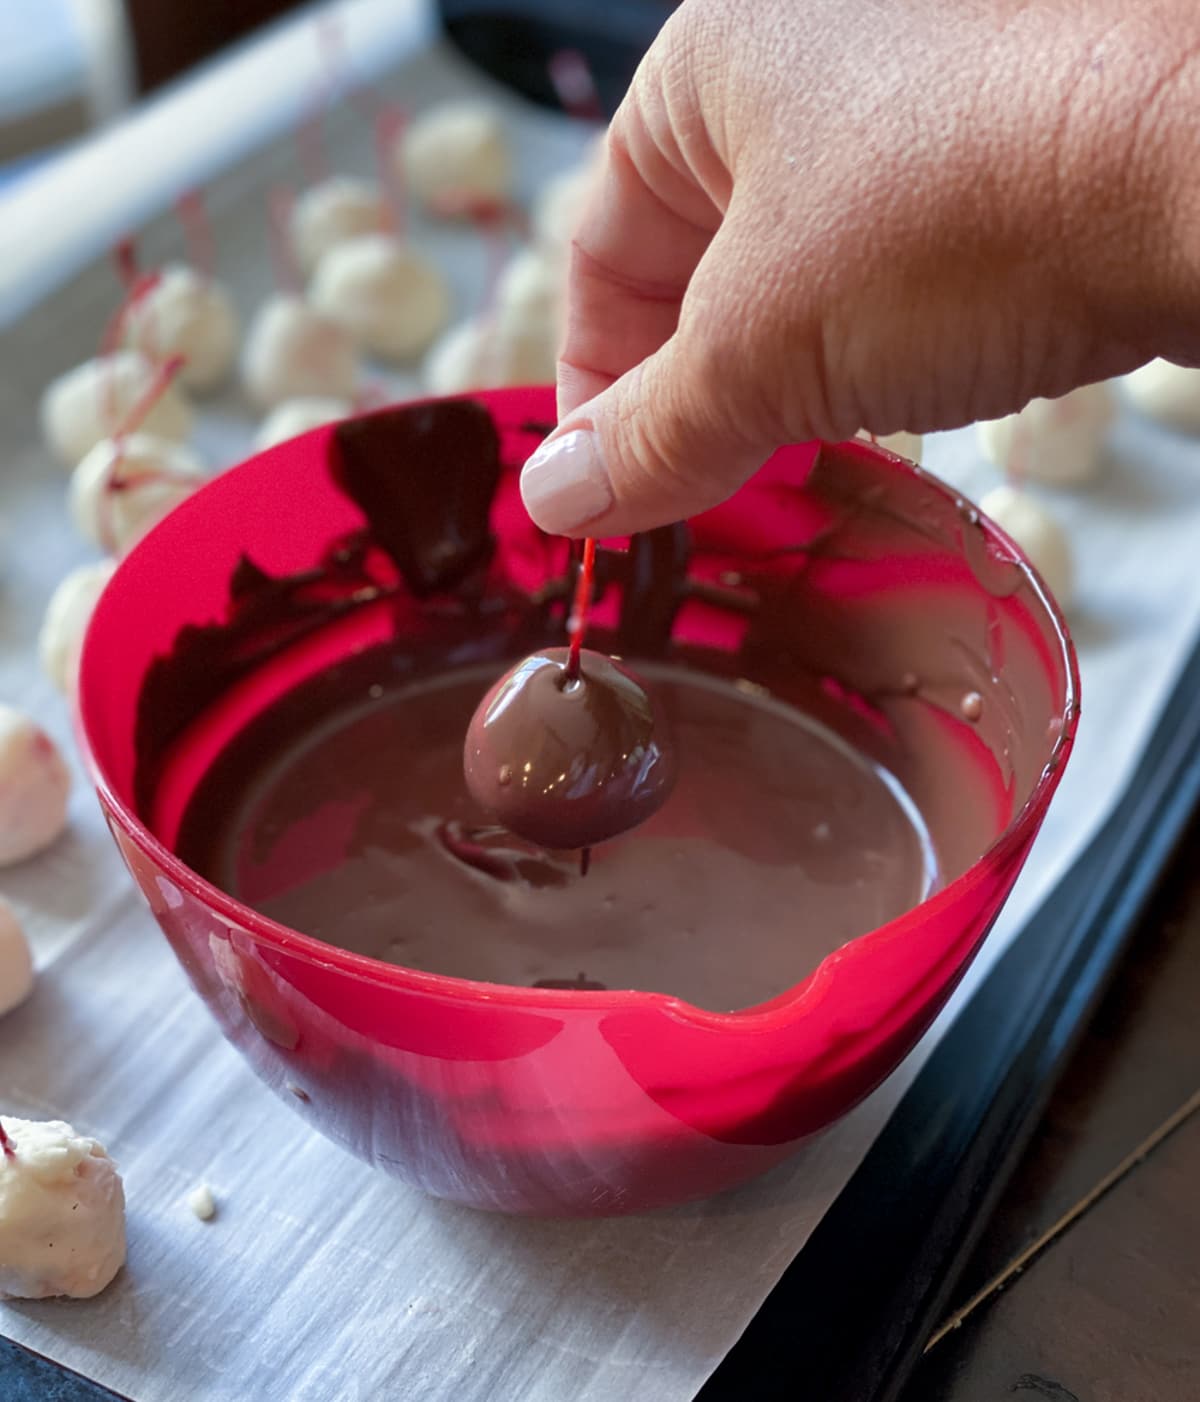 DIpping a cherry into melted chocolate in a red bowl.